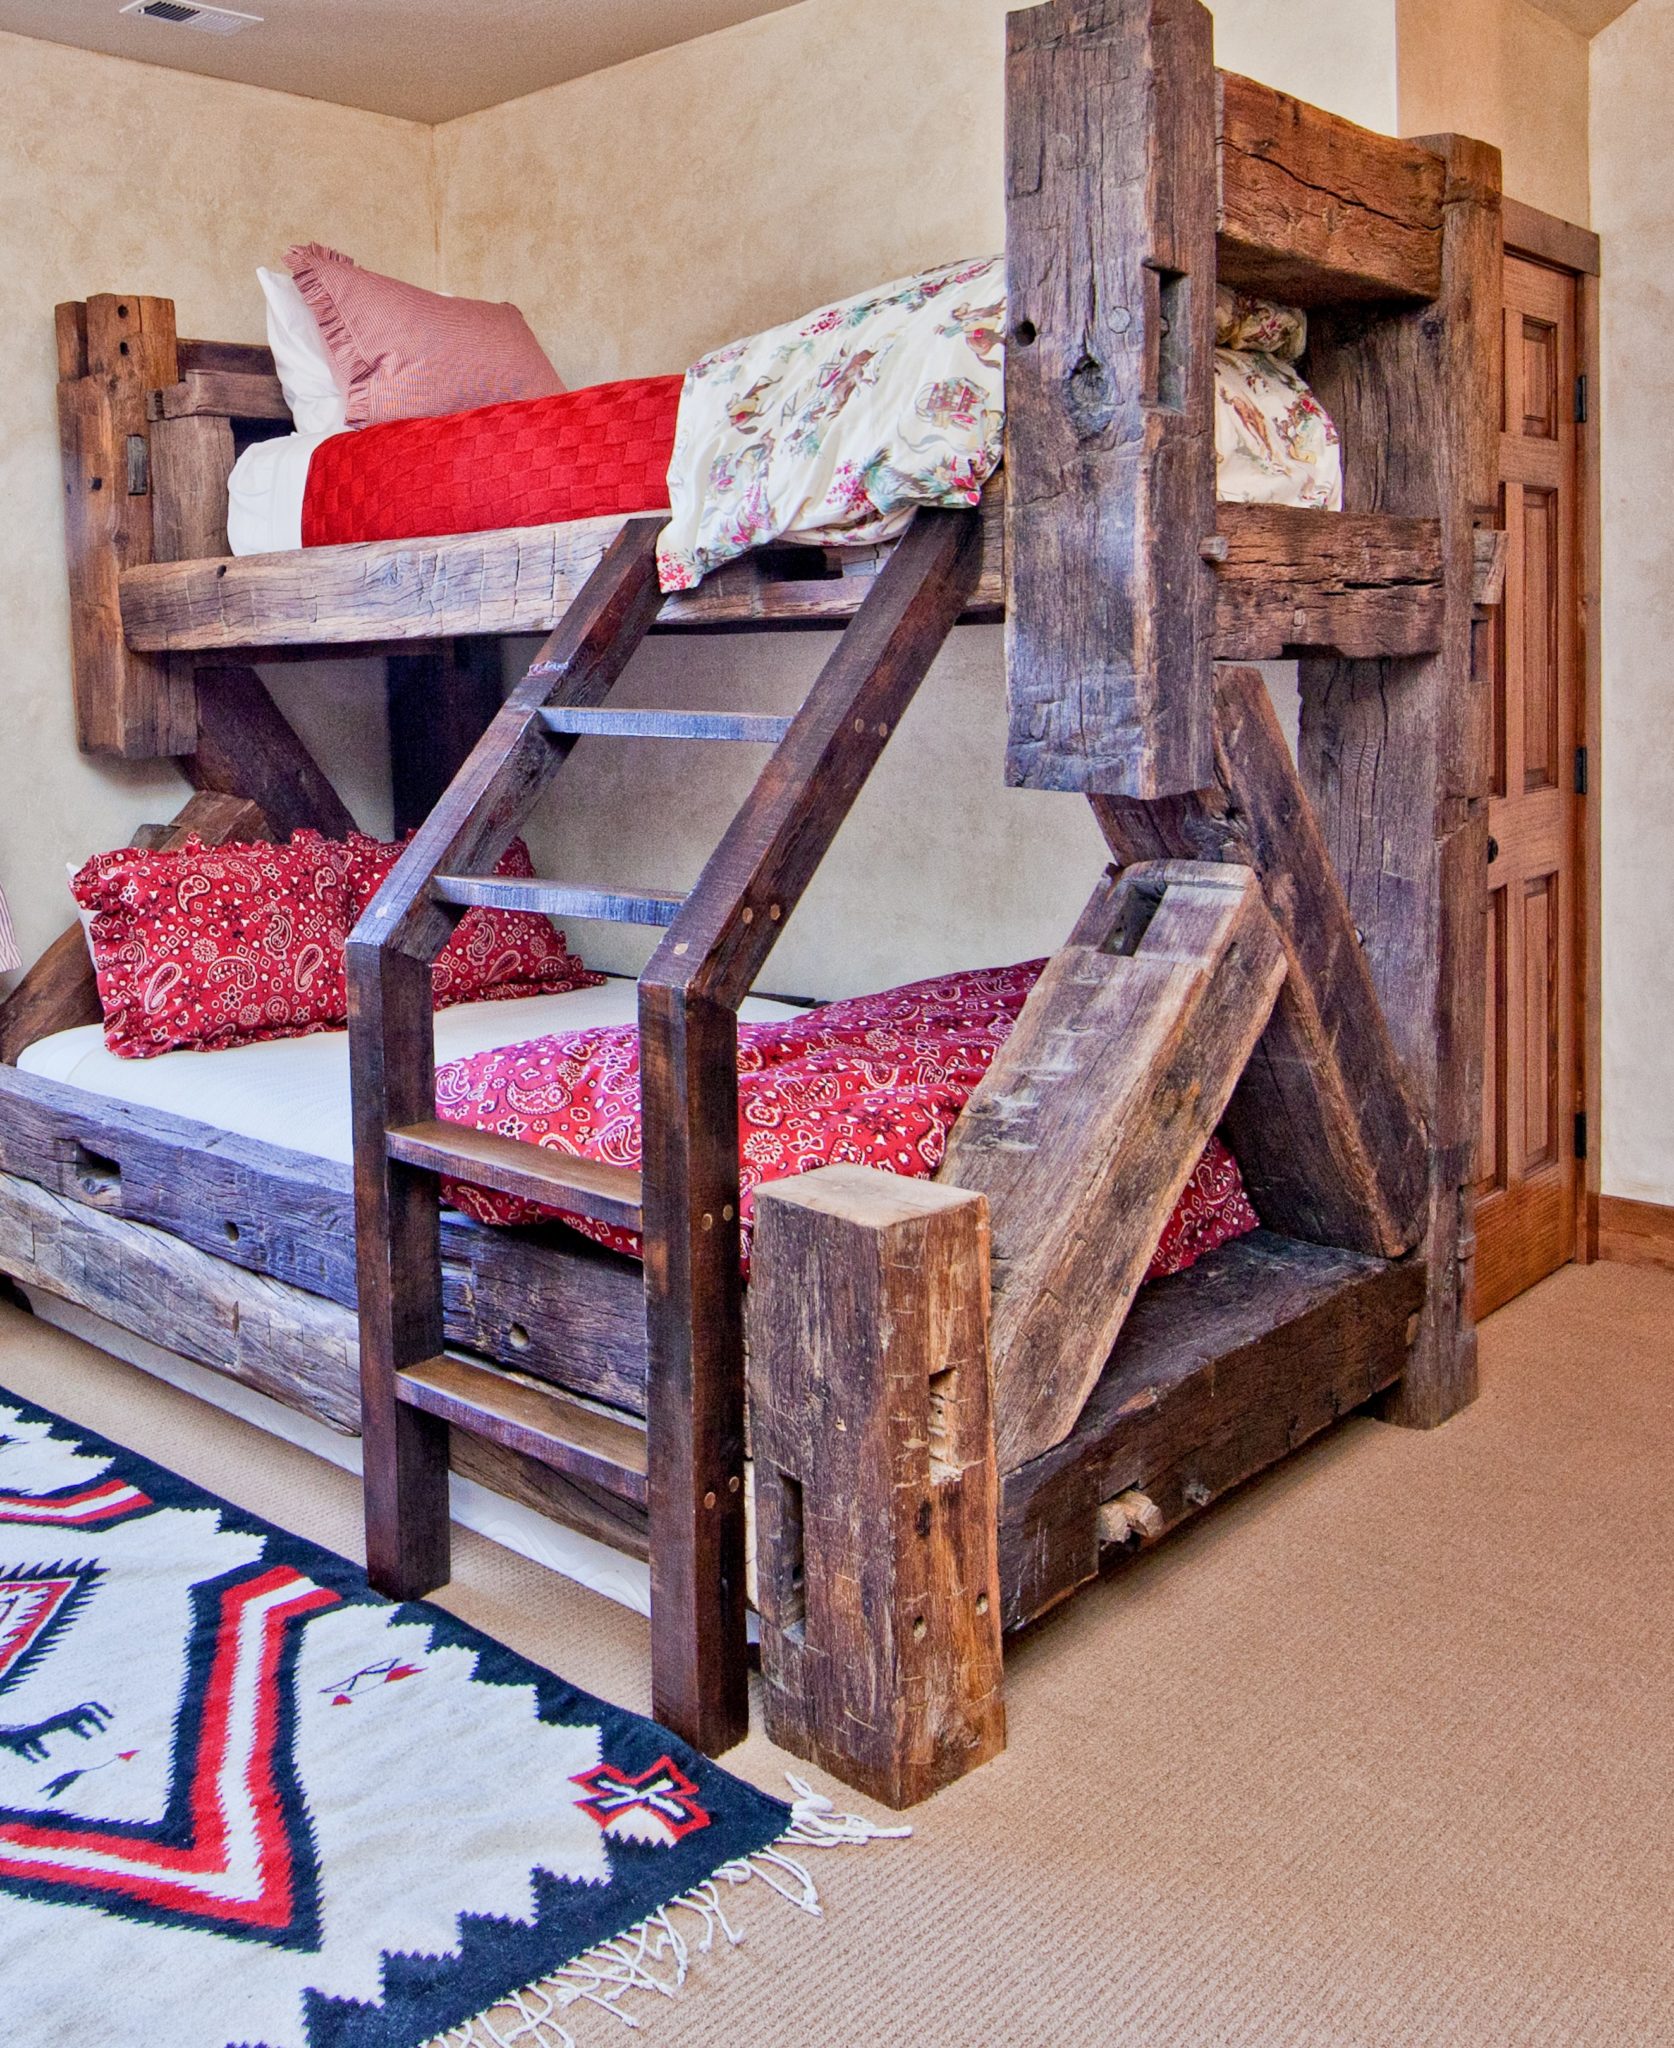 Hand Hewn Beam Furniture A Rustic, Reclaimed Wood Bunk Beds